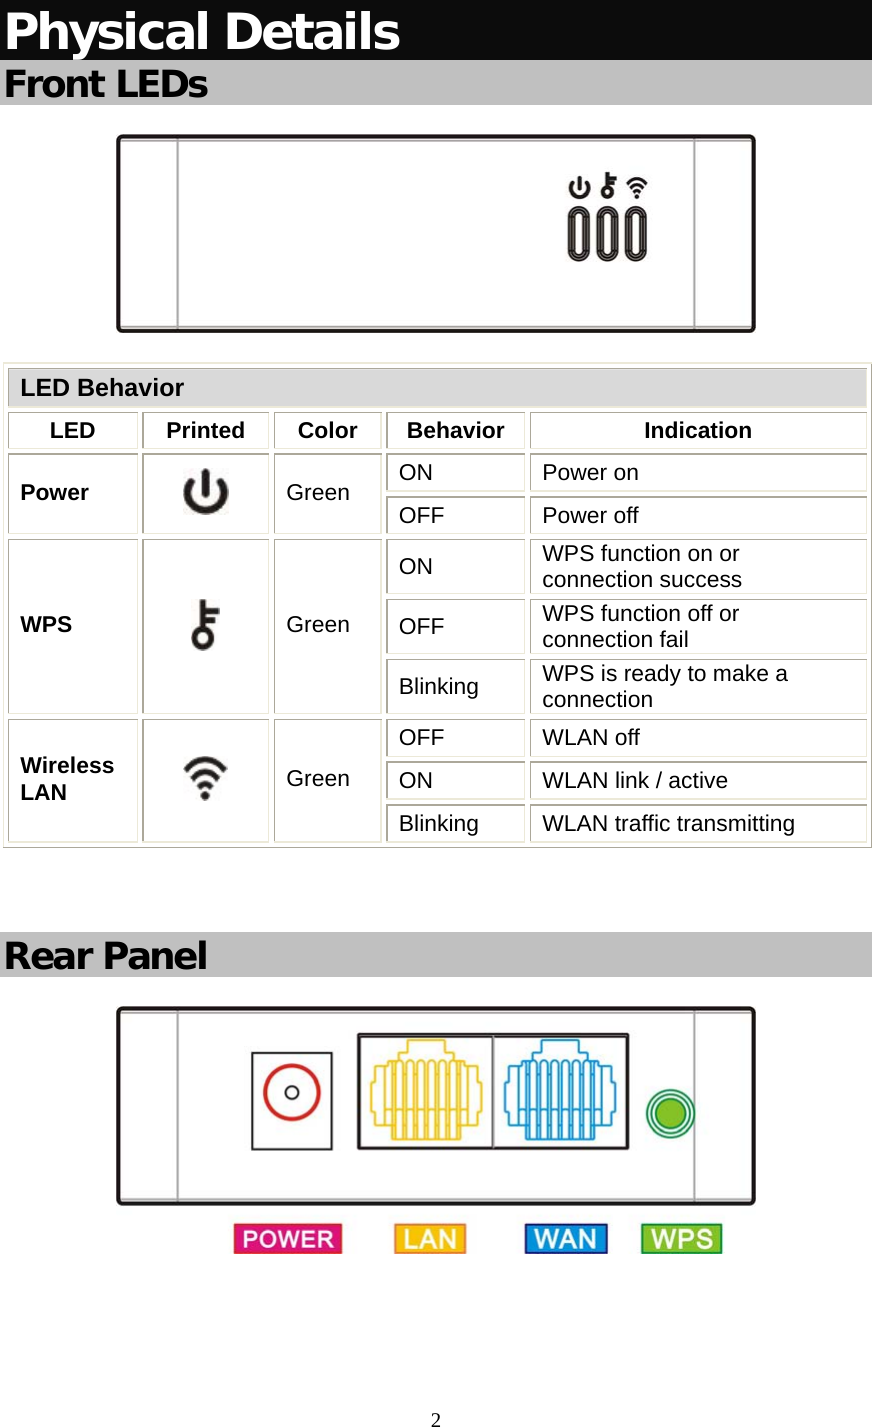   2 Physical Details Front LEDs  LED Behavior LED Printed Color Behavior  Indication ON Power on Power     Green  OFF Power off ON  WPS function on or connection success OFF  WPS function off or connection fail WPS     Green Blinking  WPS is ready to make a connection OFF WLAN off ON  WLAN link / active Wireless LAN     Green Blinking  WLAN traffic transmitting  Rear Panel    